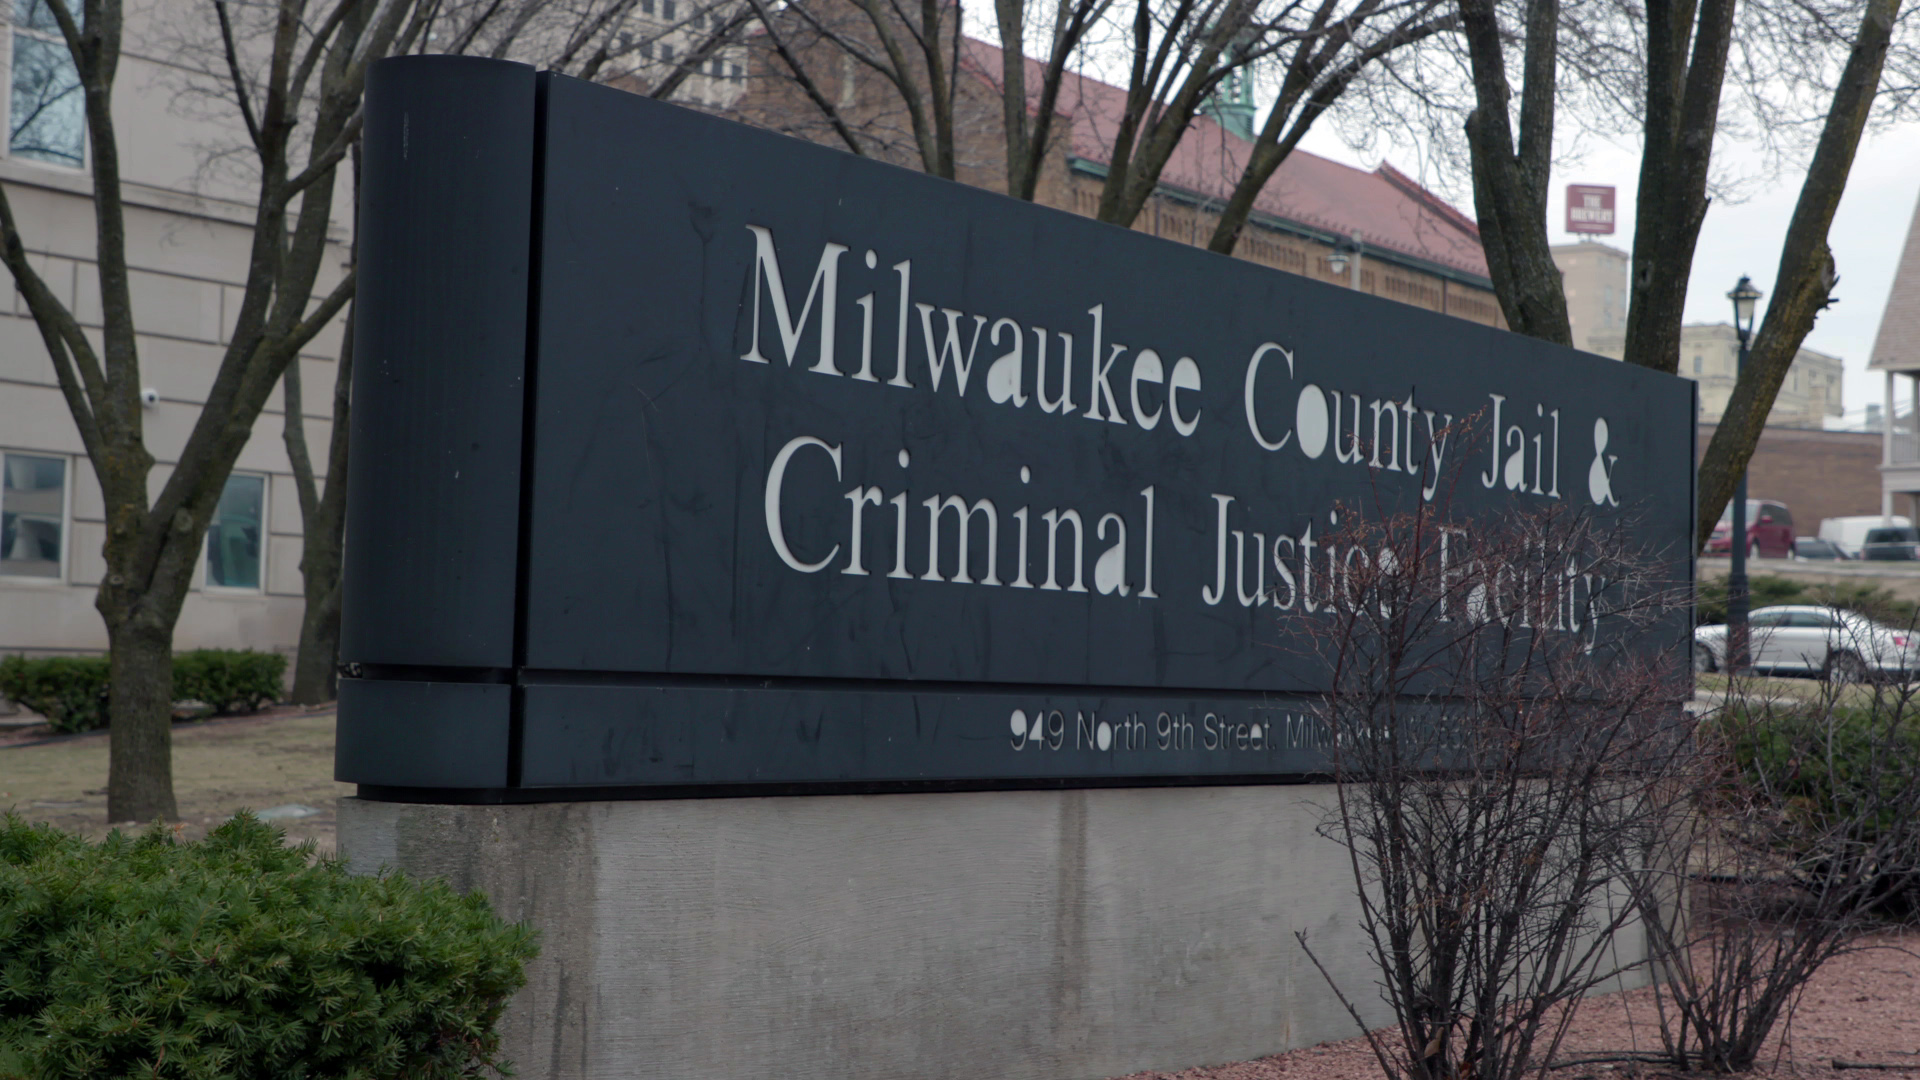 A large sign reading "Milwaukee County Jail & Criminal Justice Facility" with an address reading "949 North 9th Street Milwaukee" stands amid bushes and trees in front of a building, with parked cars and other buildings in the background.